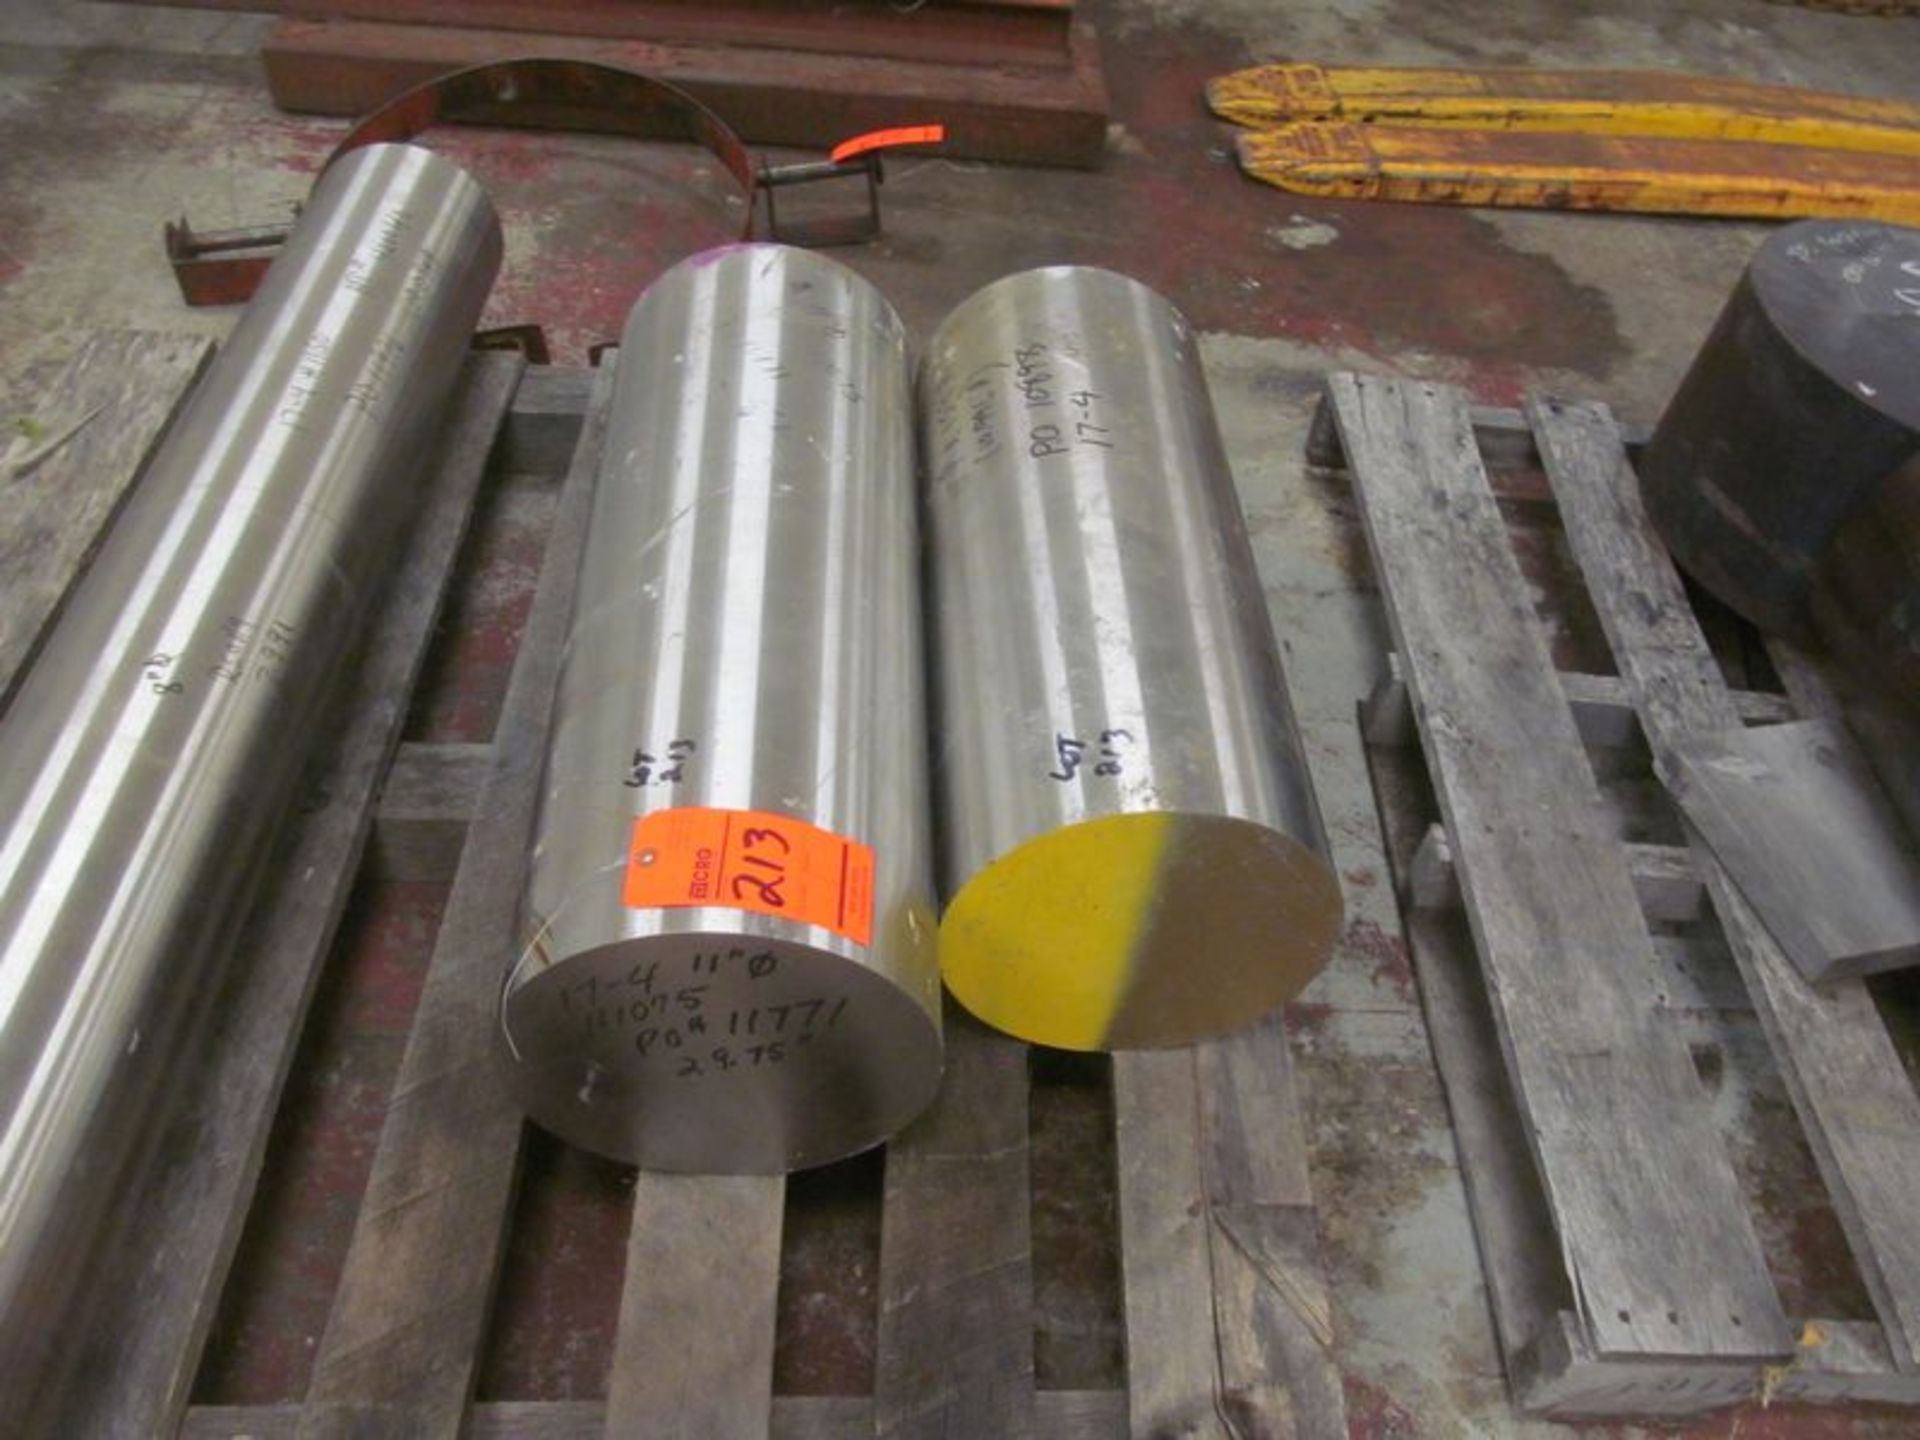 Lot of (2) pieces Stainless Steel grade 17-4, (1) 11" diameter x 25.5" lenth, and (1) 11" diameter x - Image 2 of 2